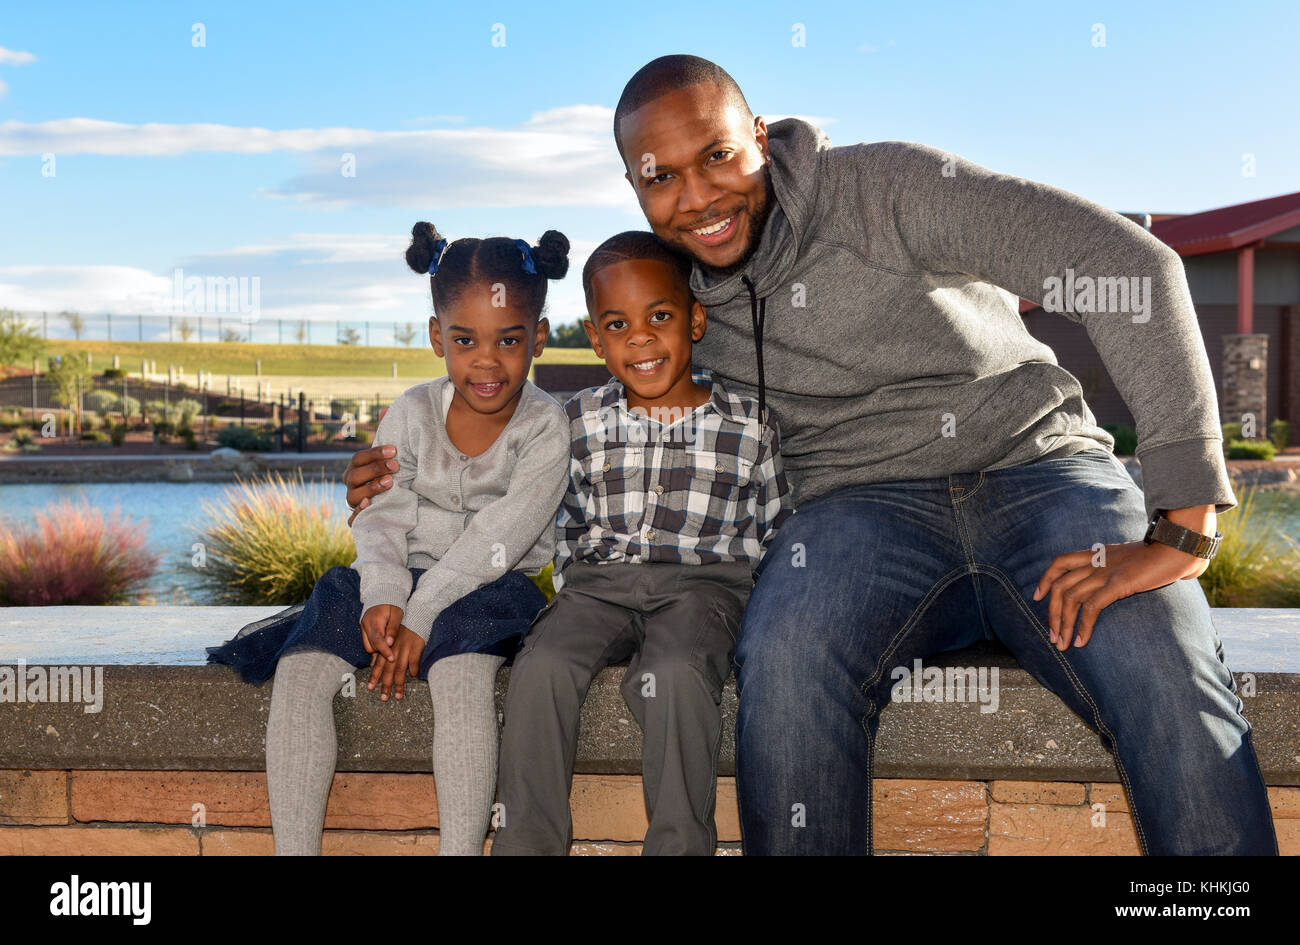 African American Man with son and daughter in a park, smiling, looking at camera Stock Photo